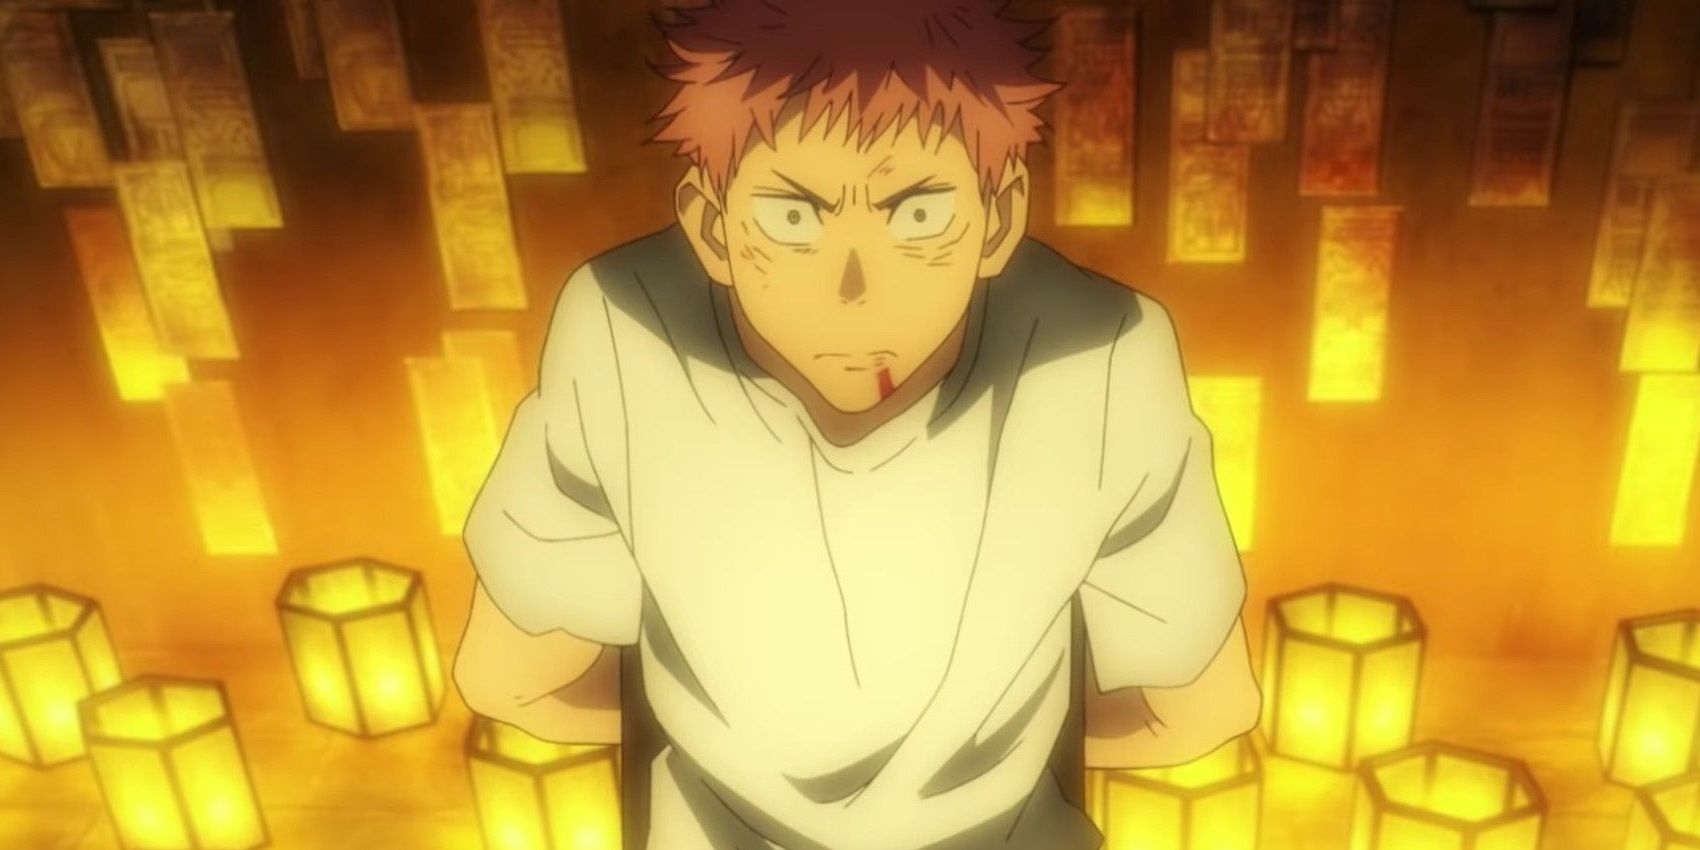 Itadori, the main protagonist of Jujutsu Kaisen, learning that he's been sentenced to death